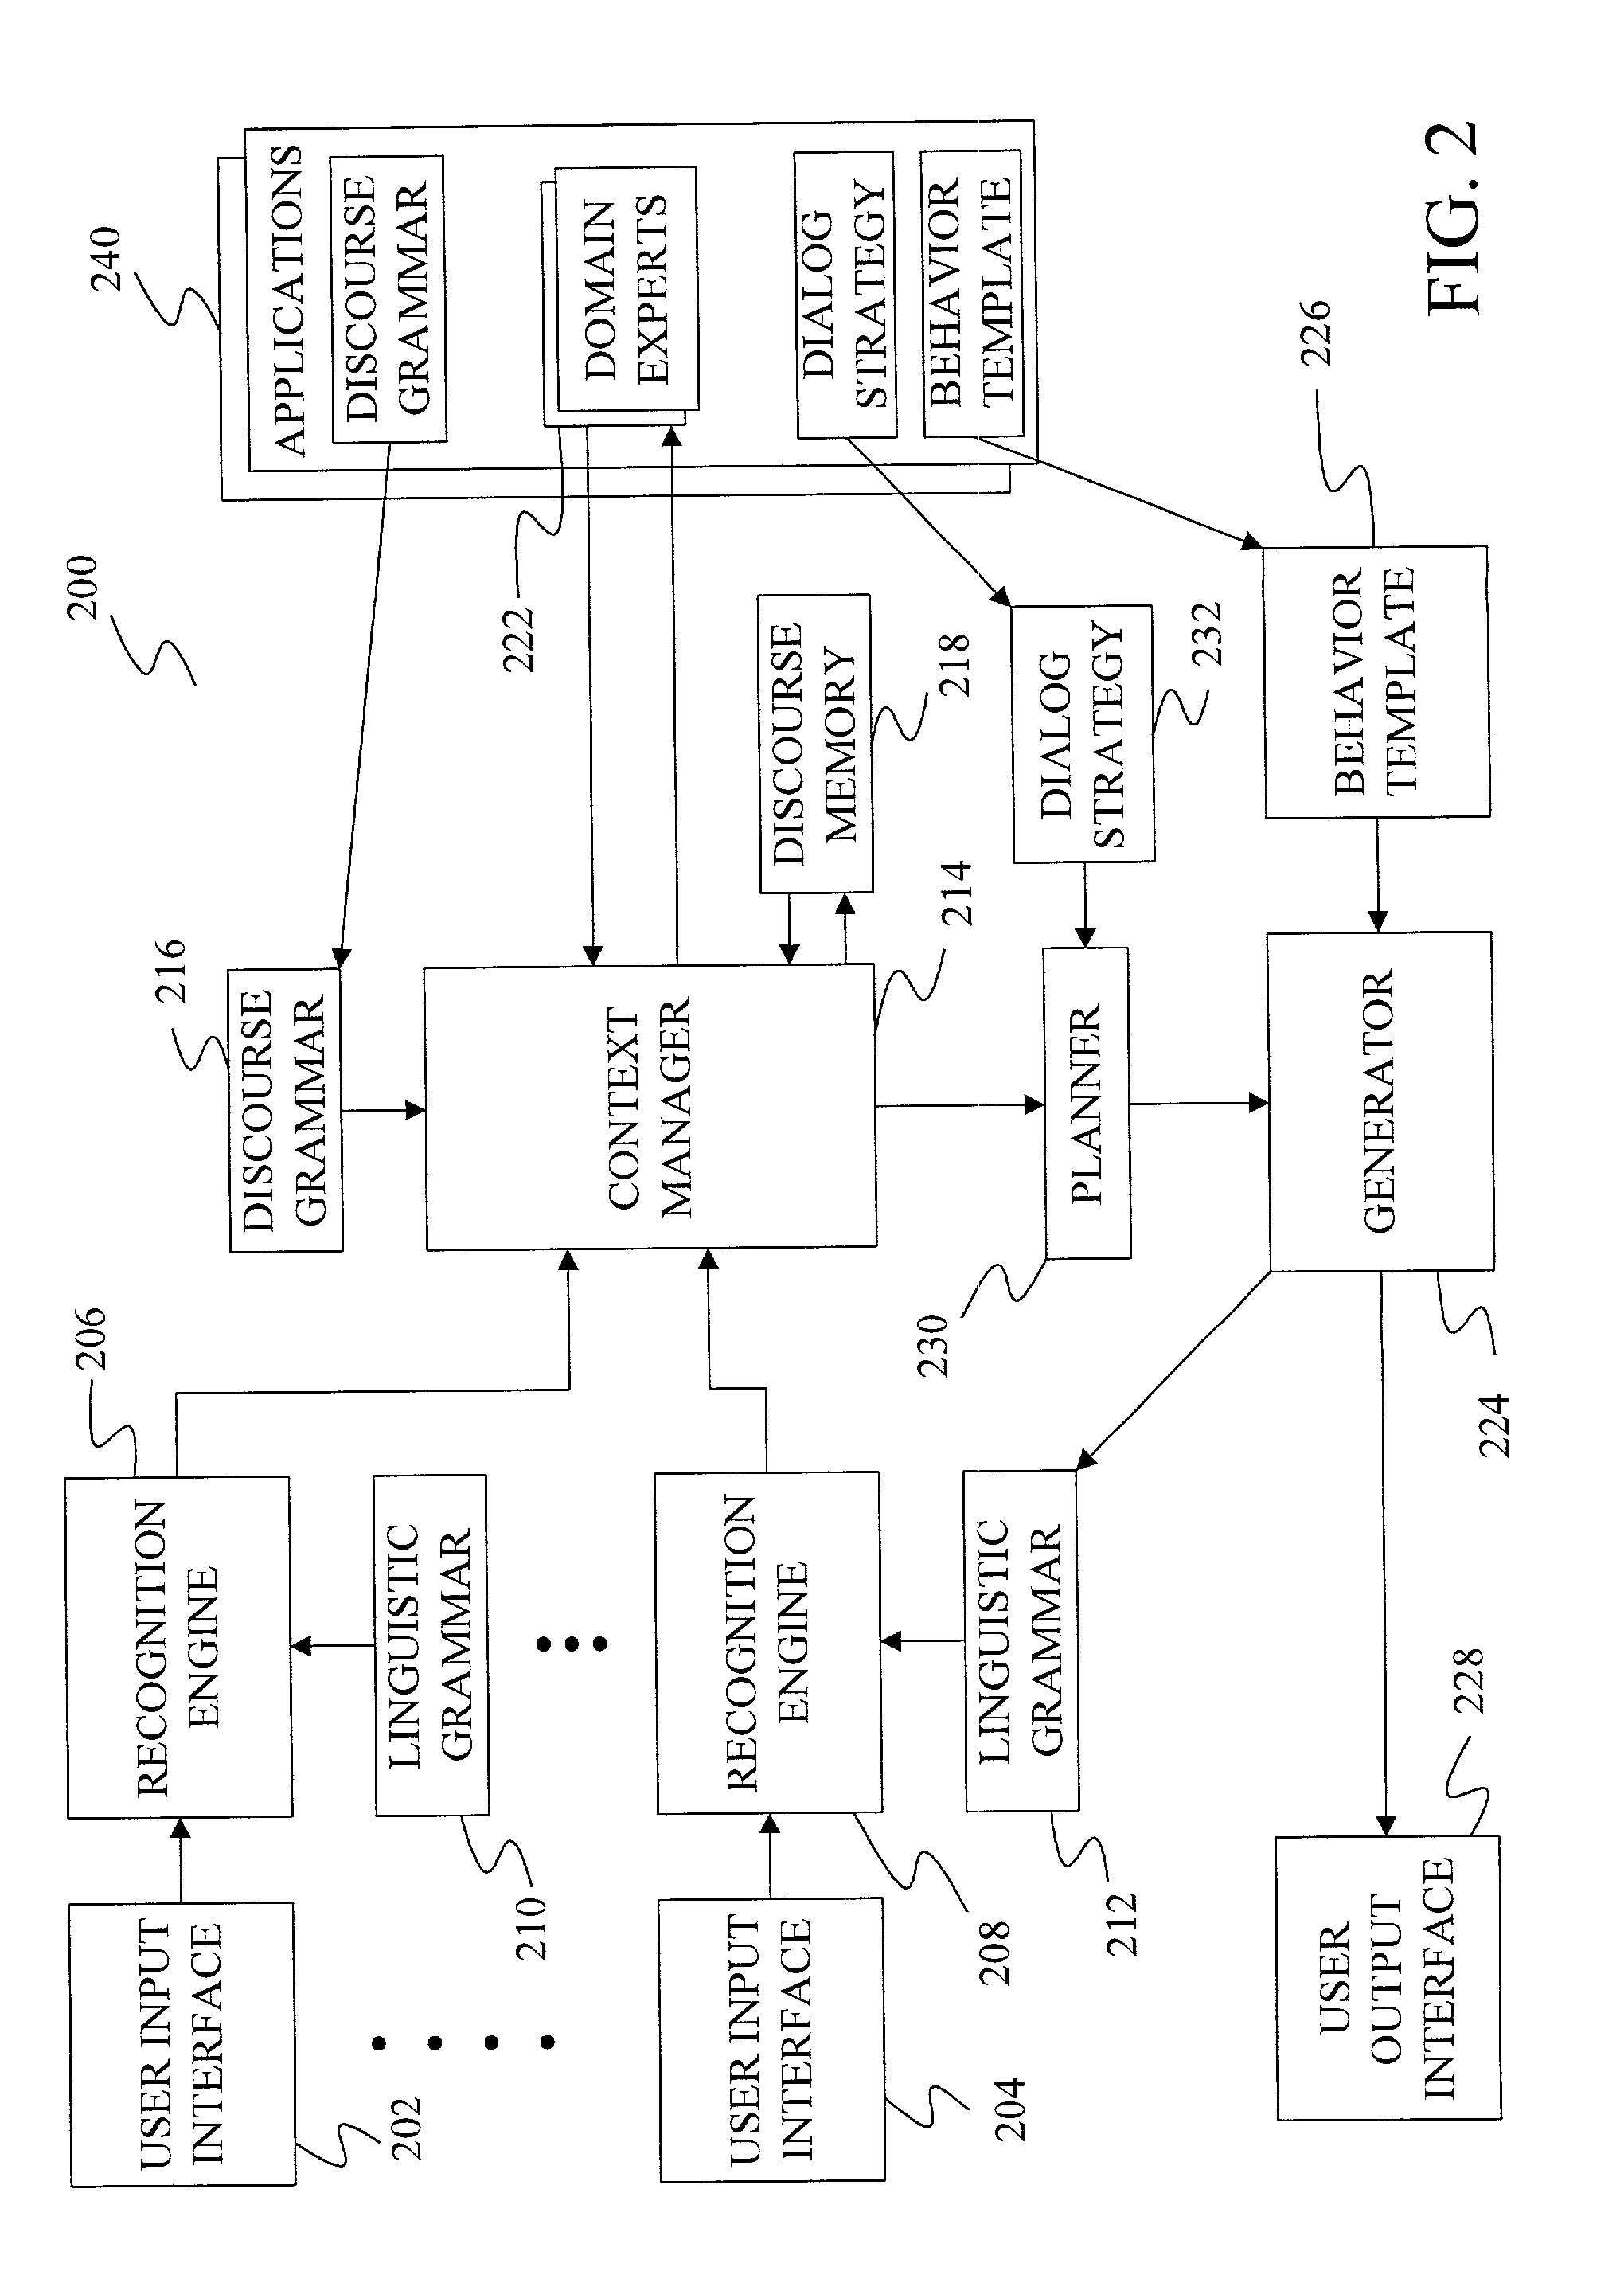 Method and apparatus for federated understanding